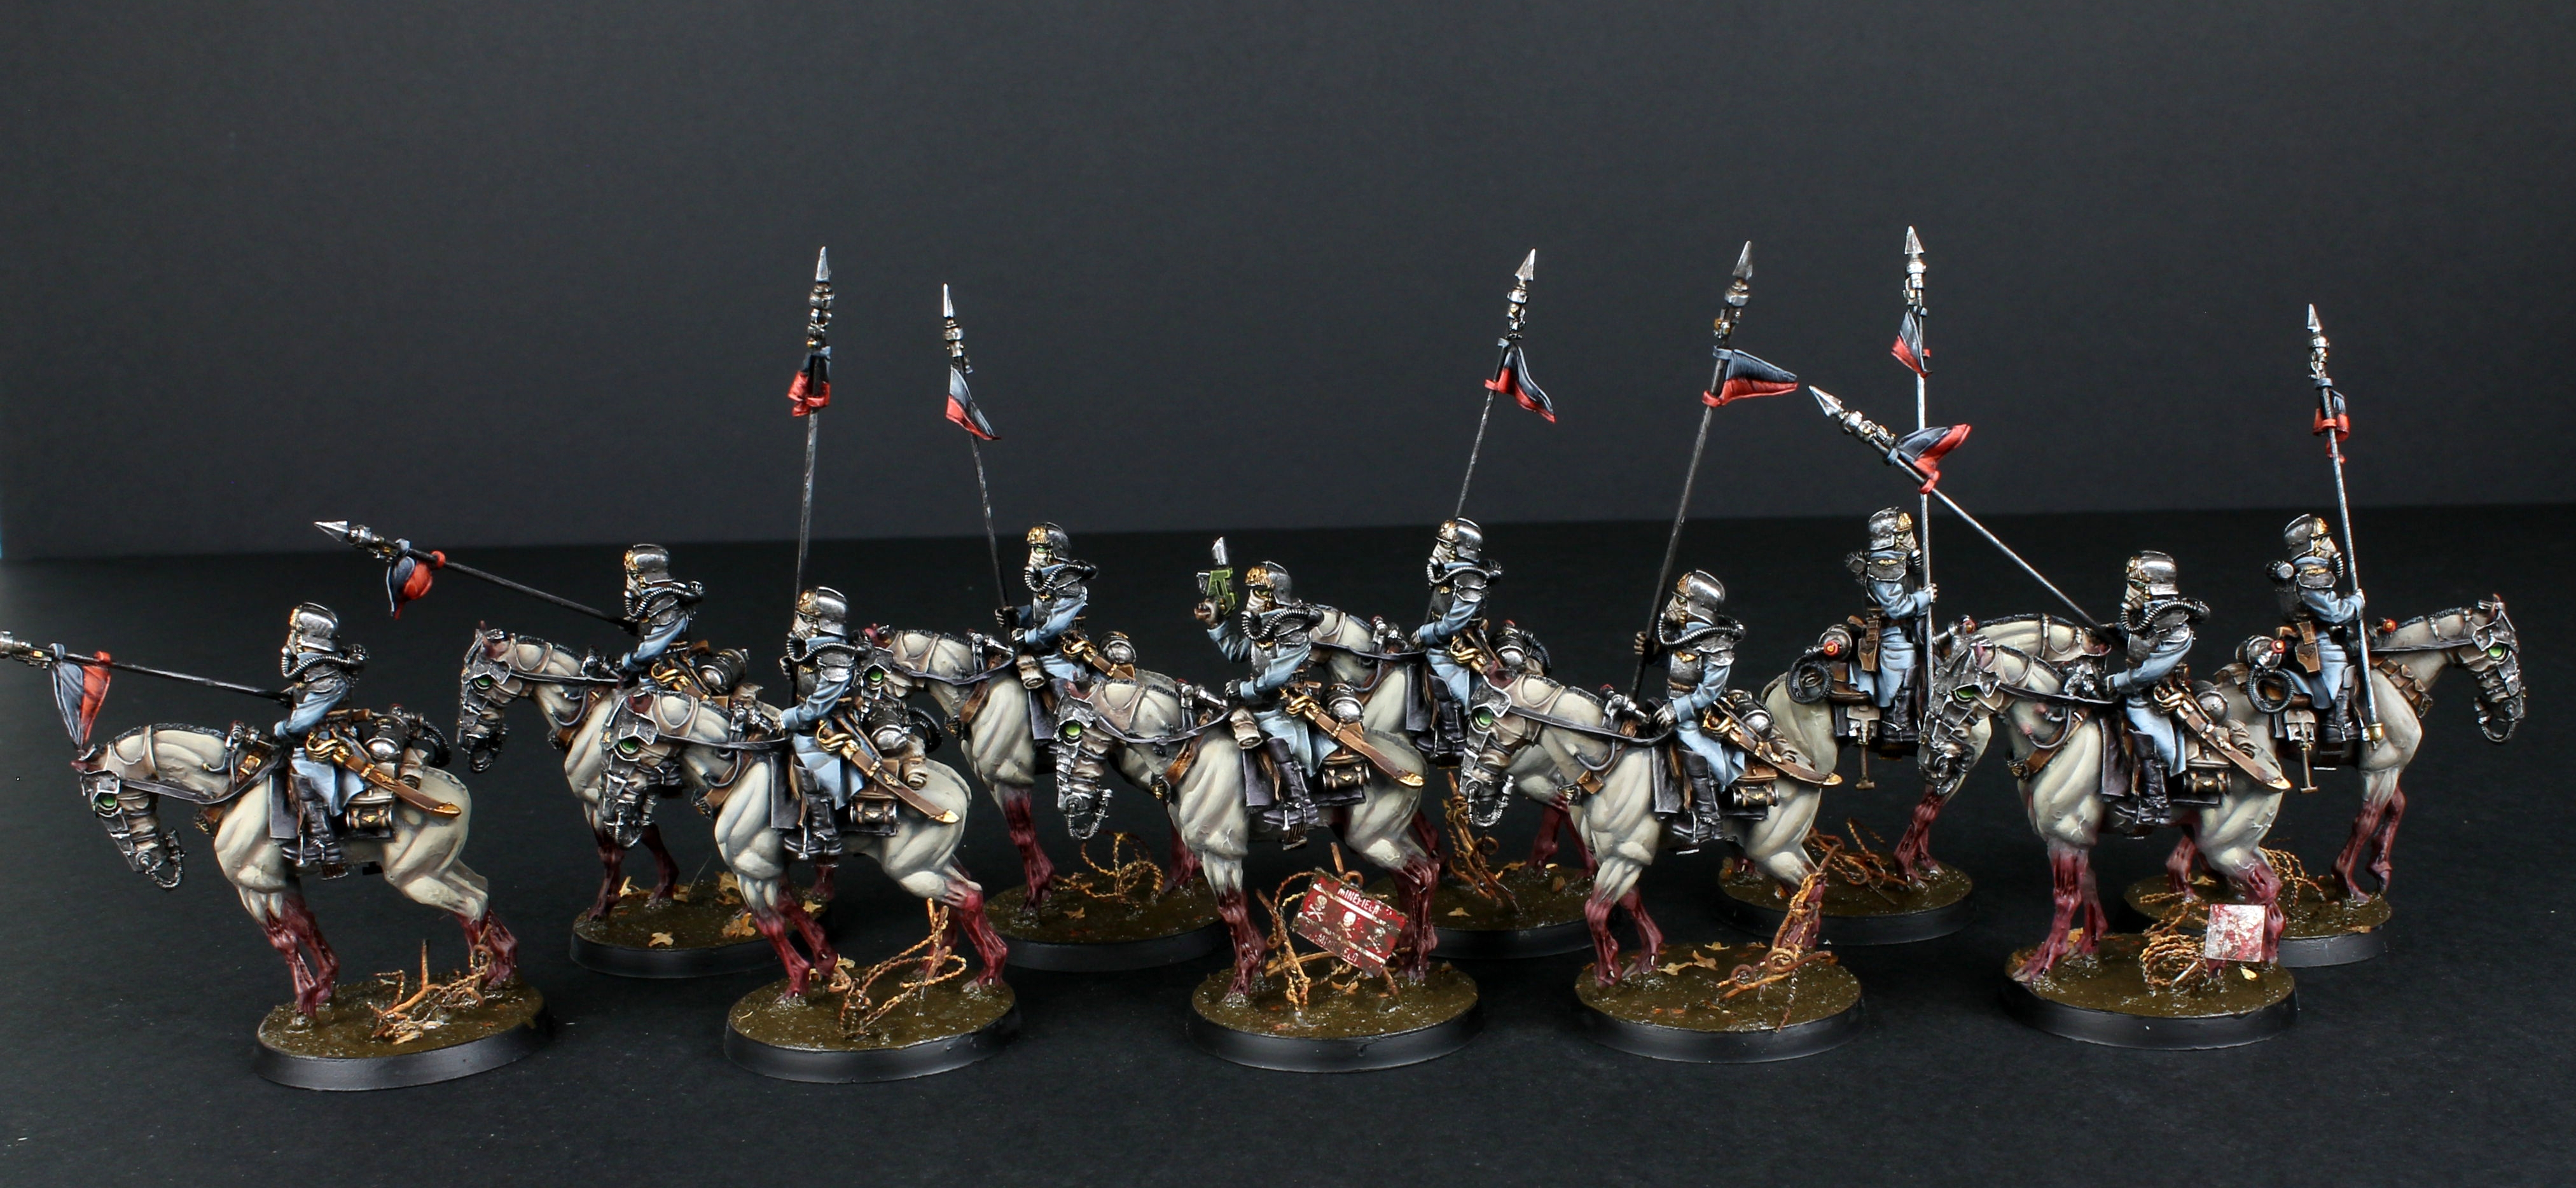 Death Korps of Krieg army commission. Some tips! - AXIA